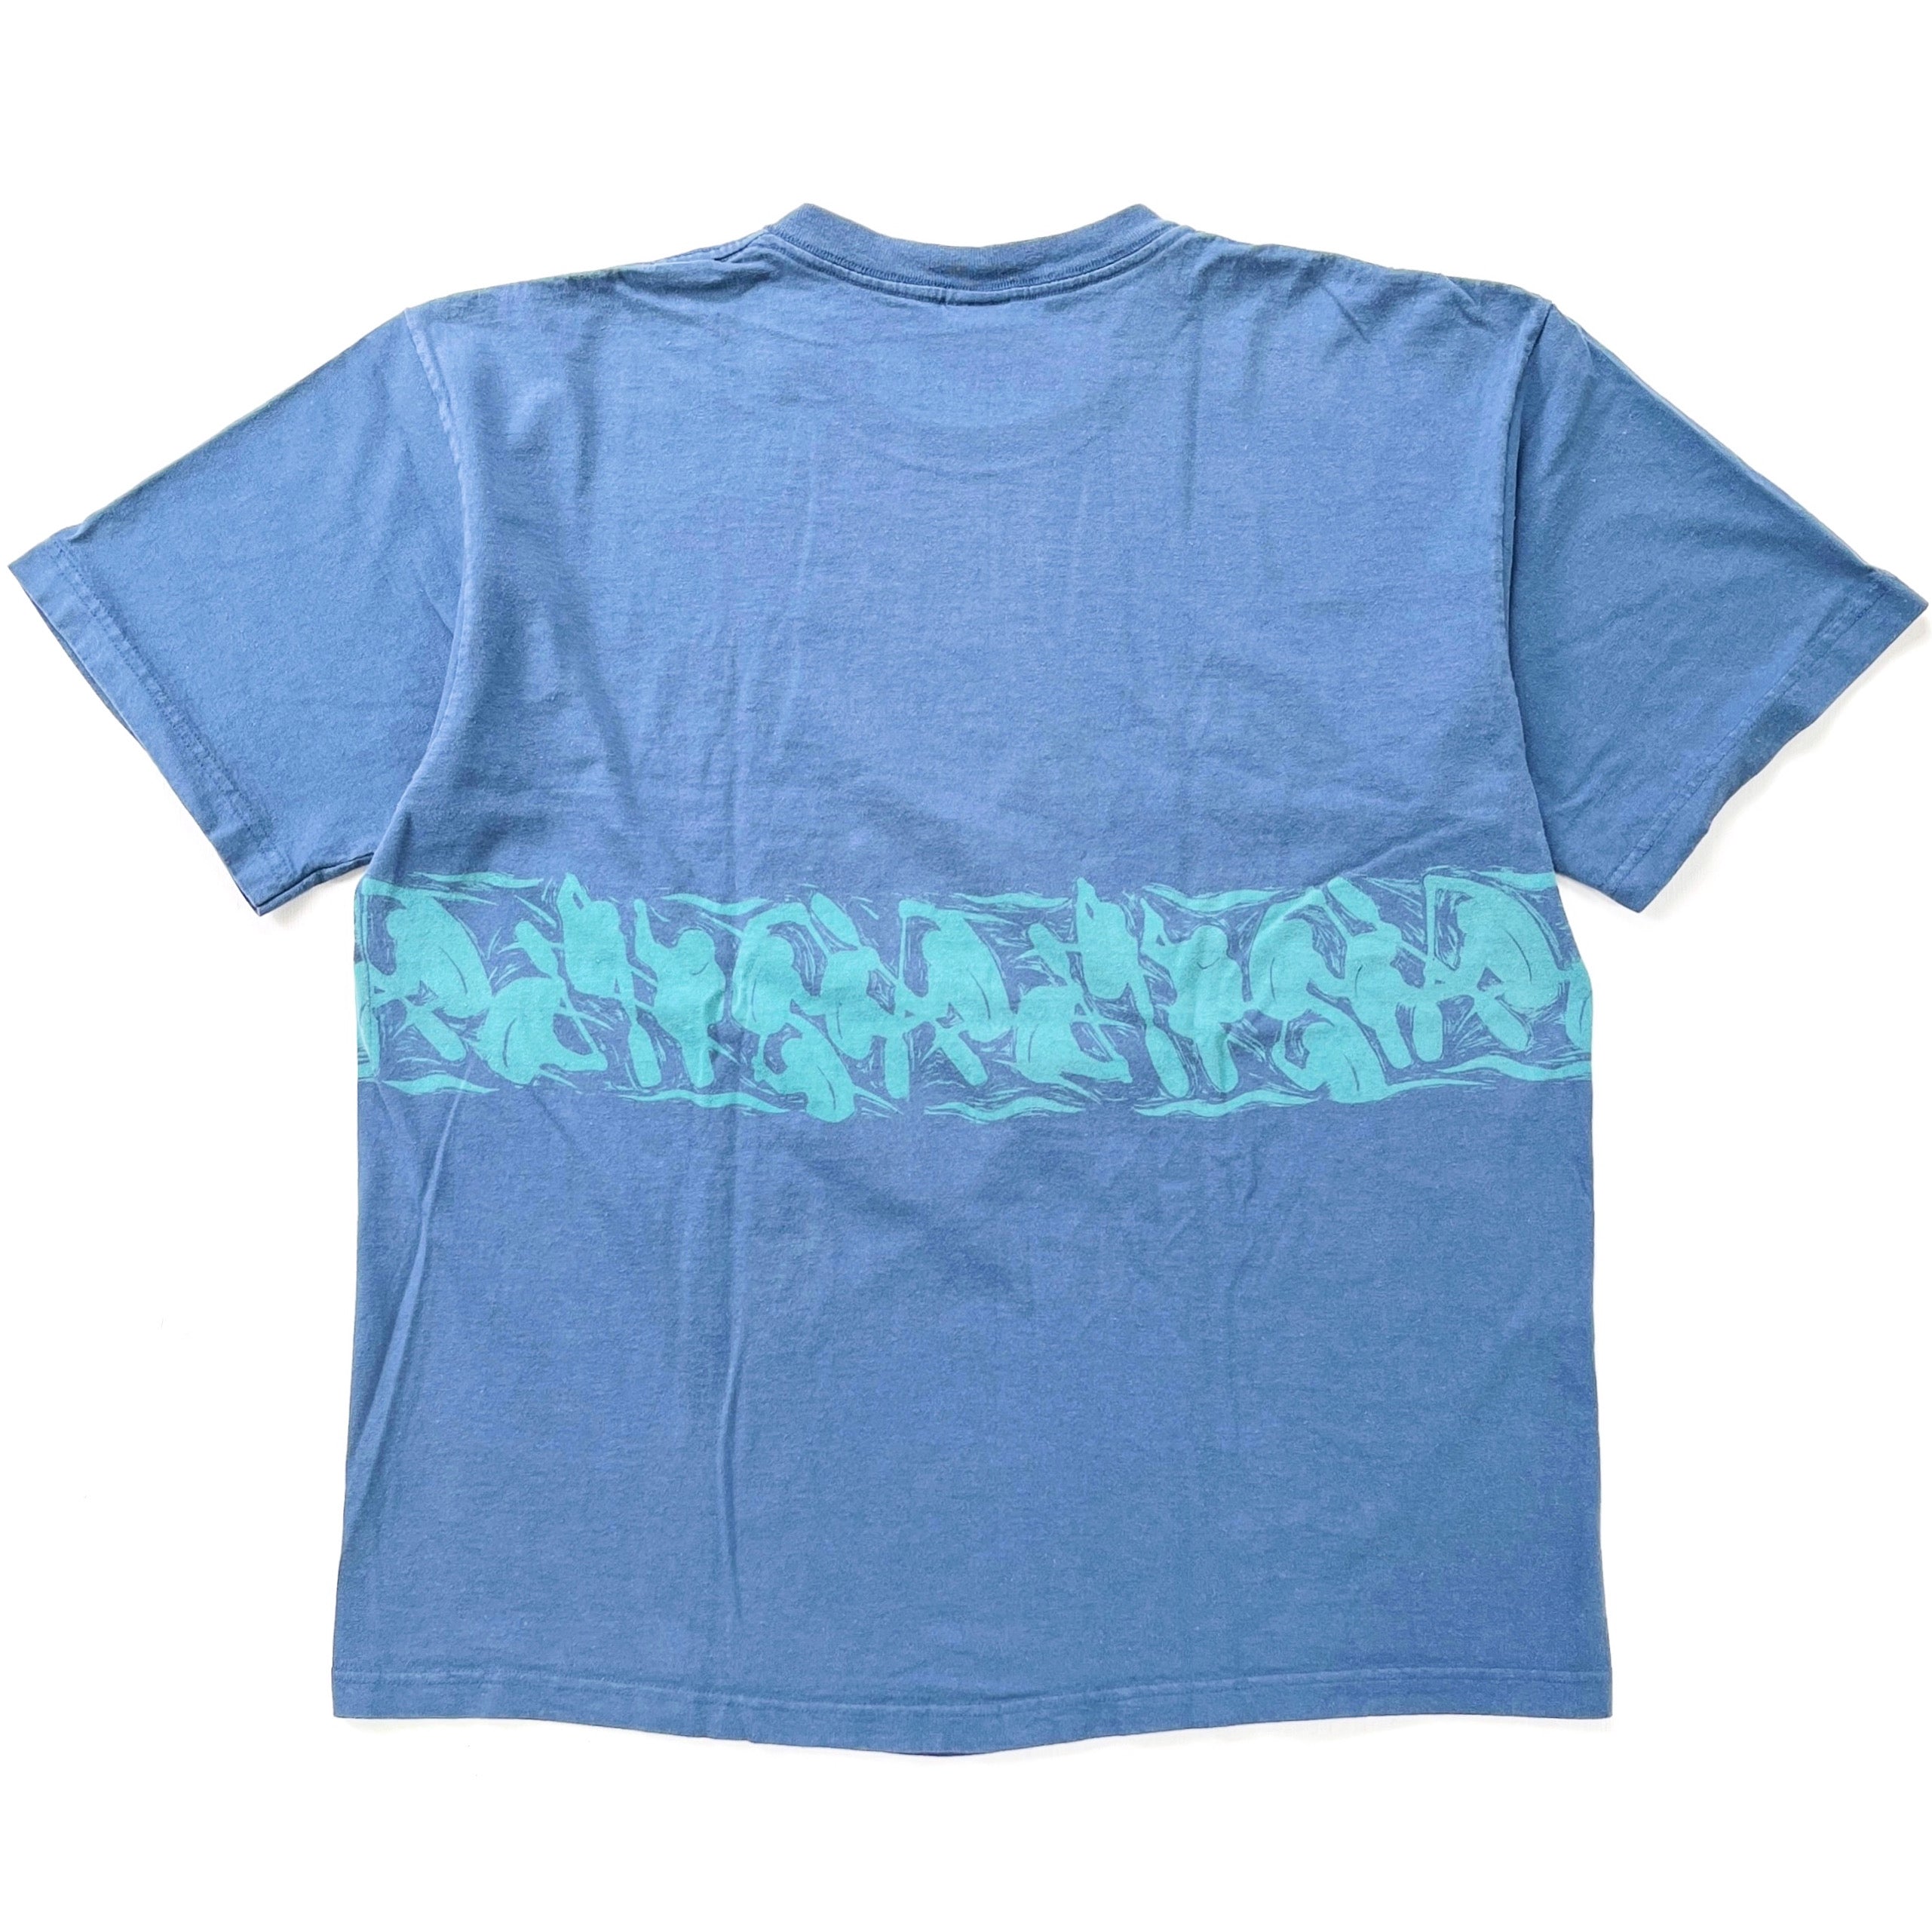 1990s Patagonia Made In The U.S.A. Organic Cotton T-Shirt (L)